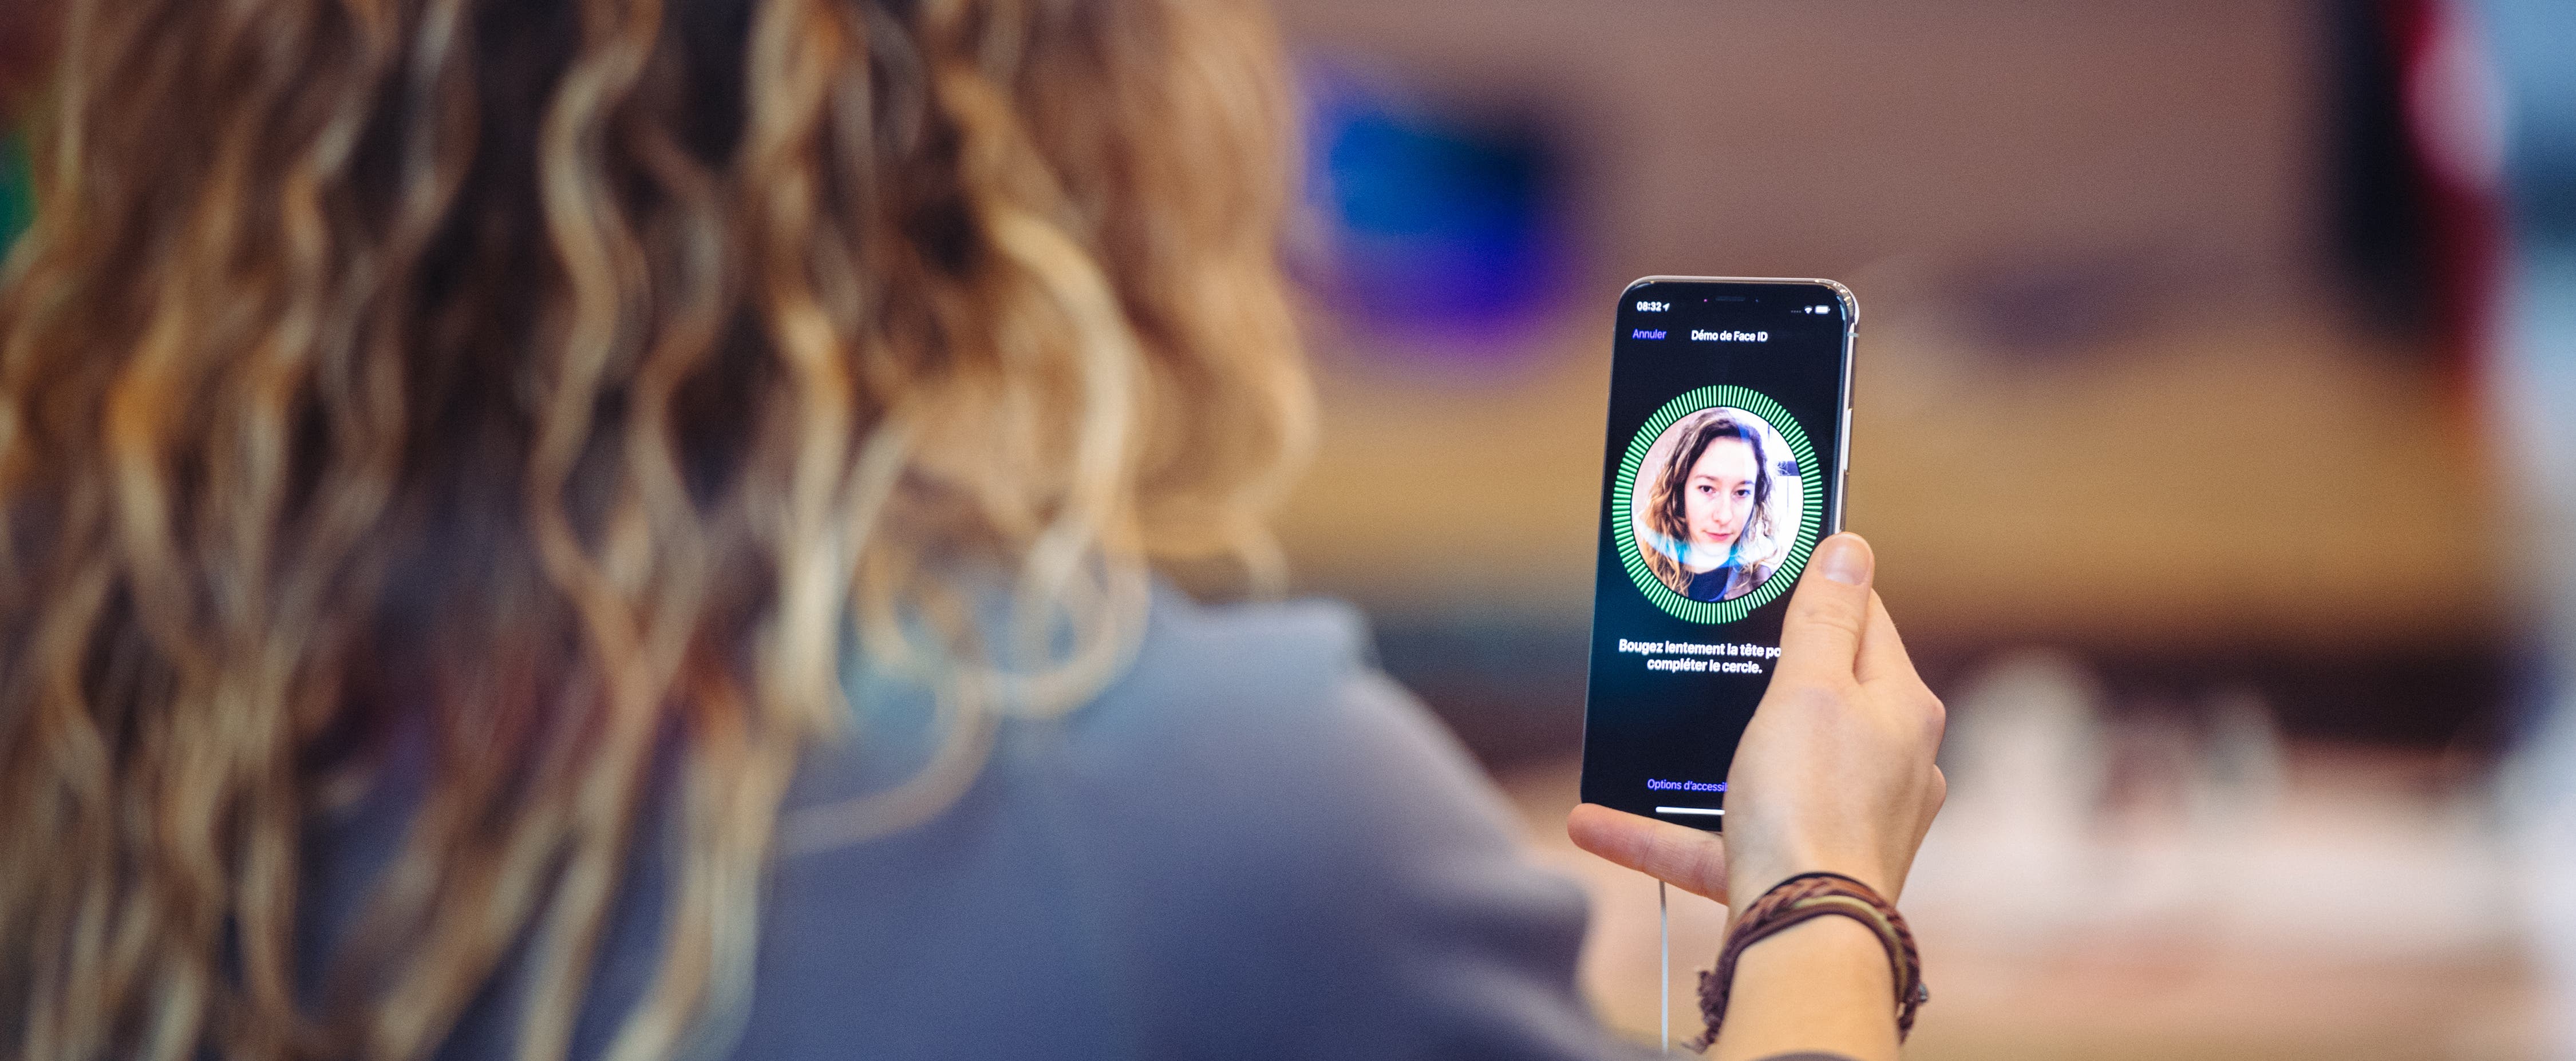 How to Set Up Face ID (Facial Recognition) on Your iPhone, Use It to